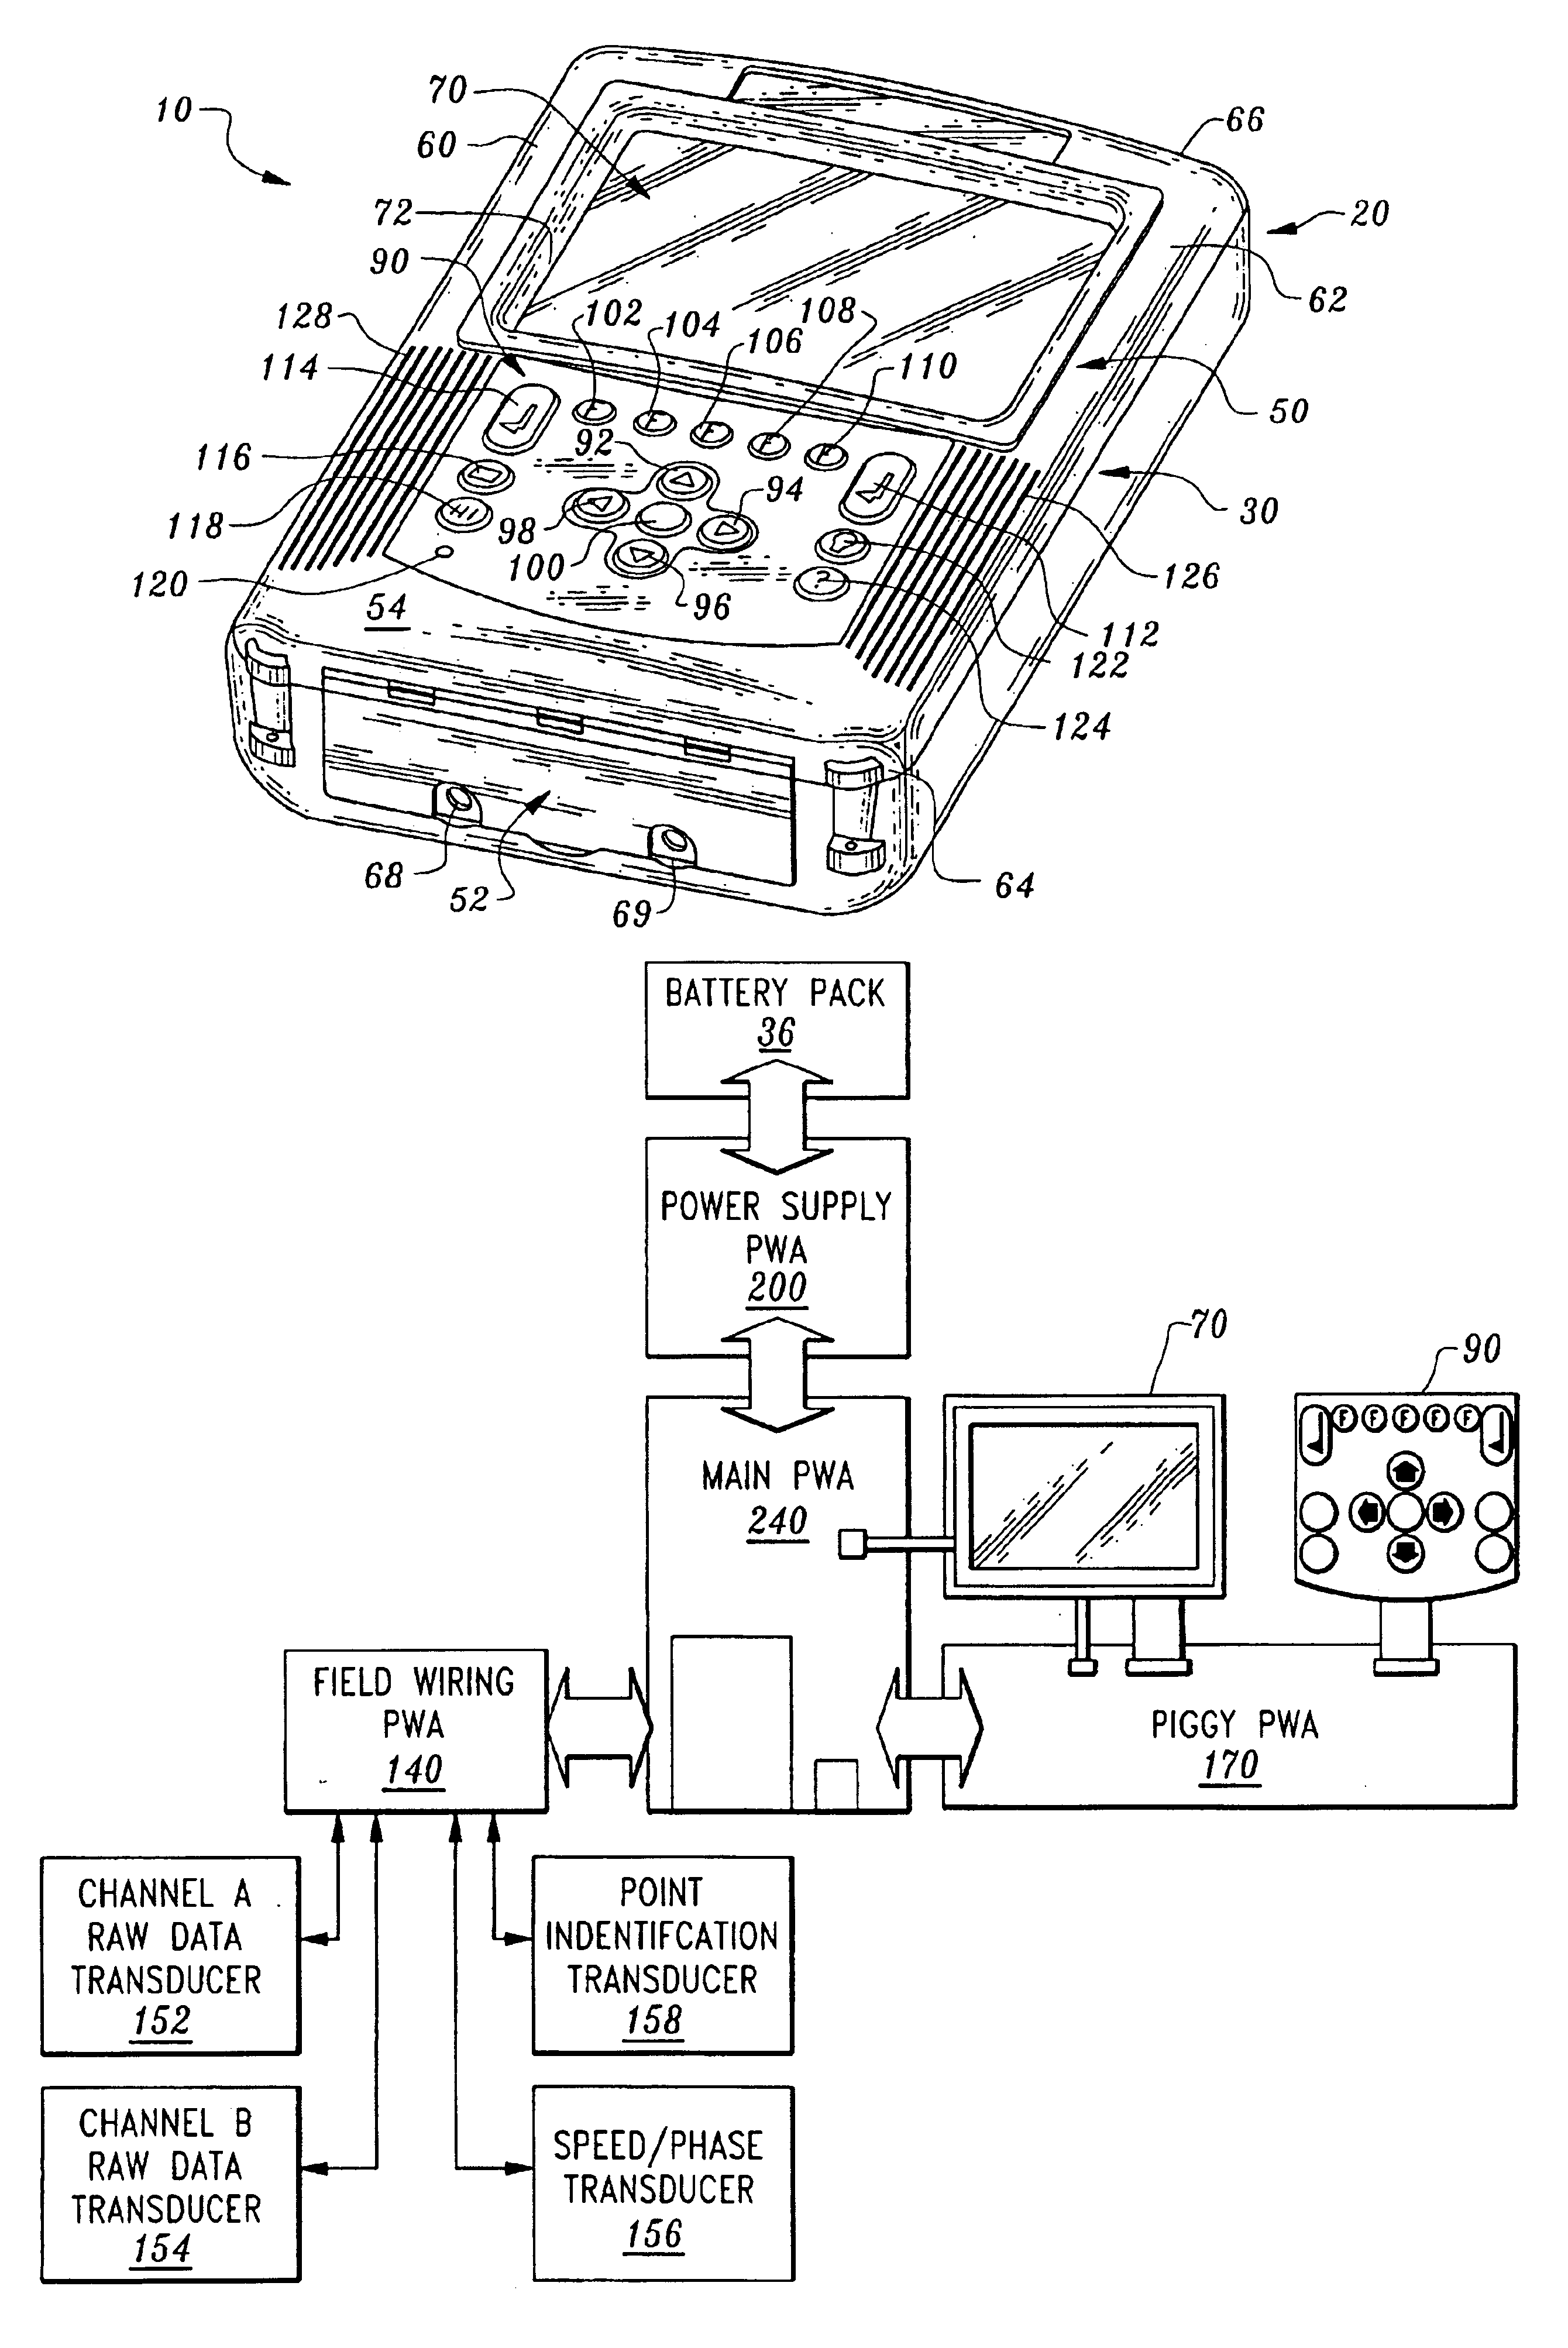 Portable data collector and analyzer: apparatus and method